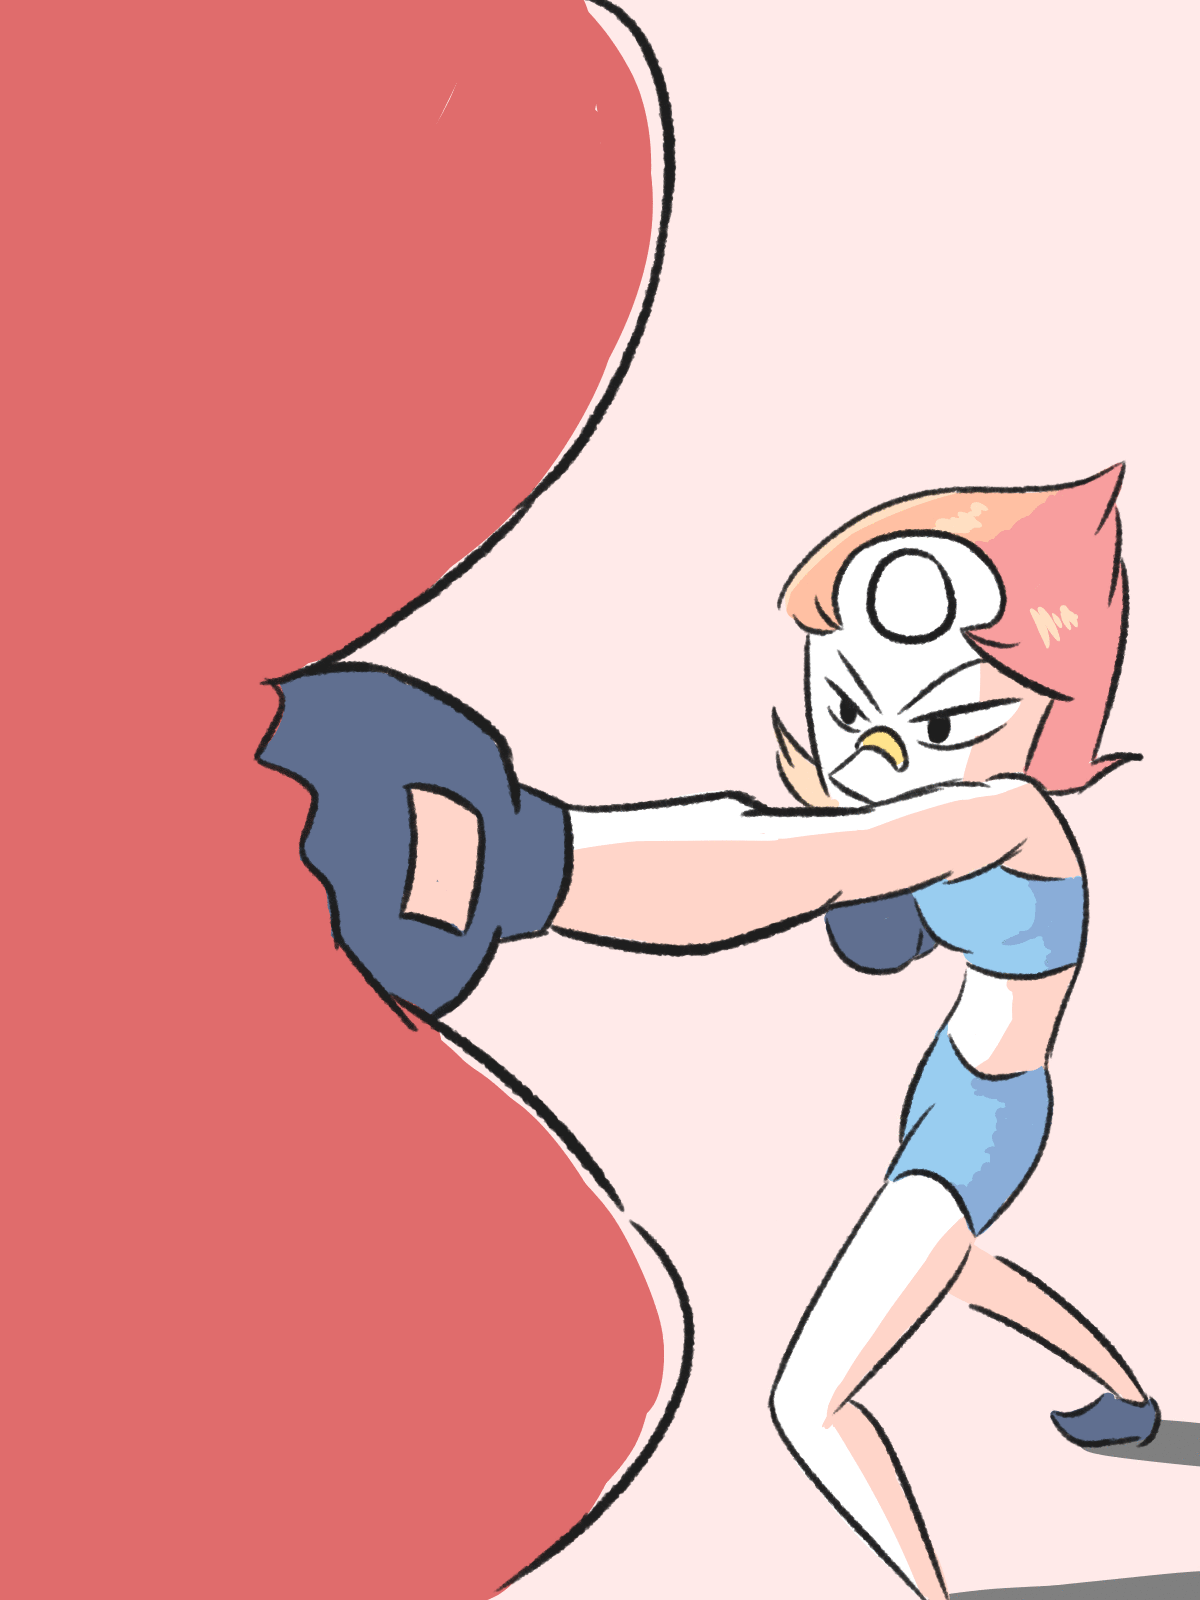 i made smthing from muaythai pearl here the alternative version ATATATATATATATATATATATATATA